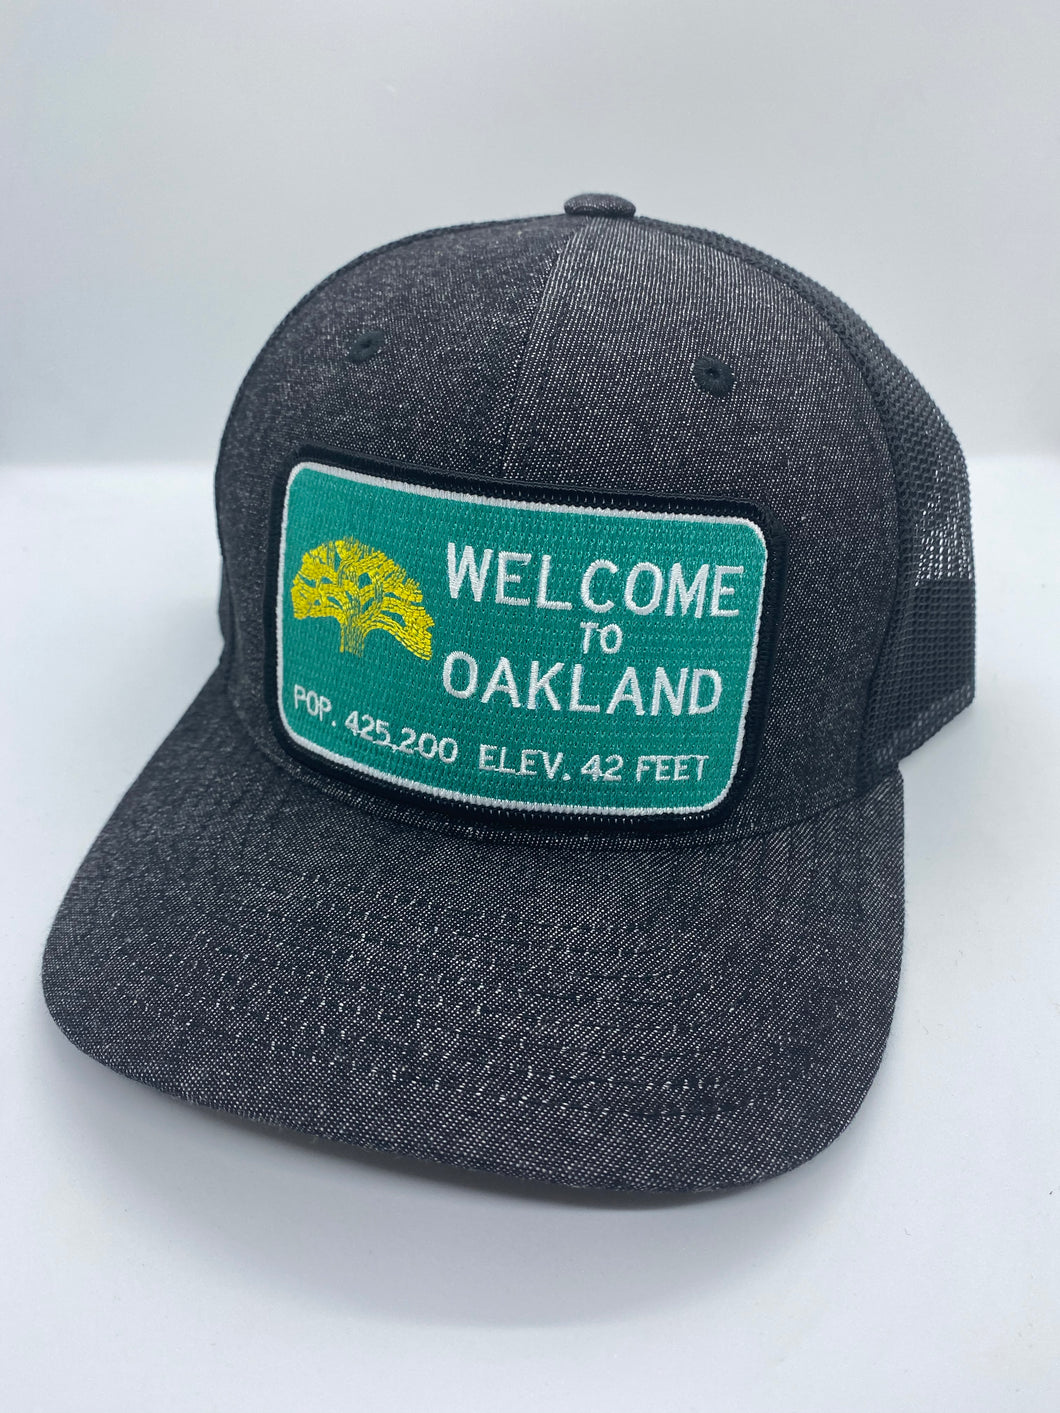 “Welcome to Oakland” Pocket Patch Cap